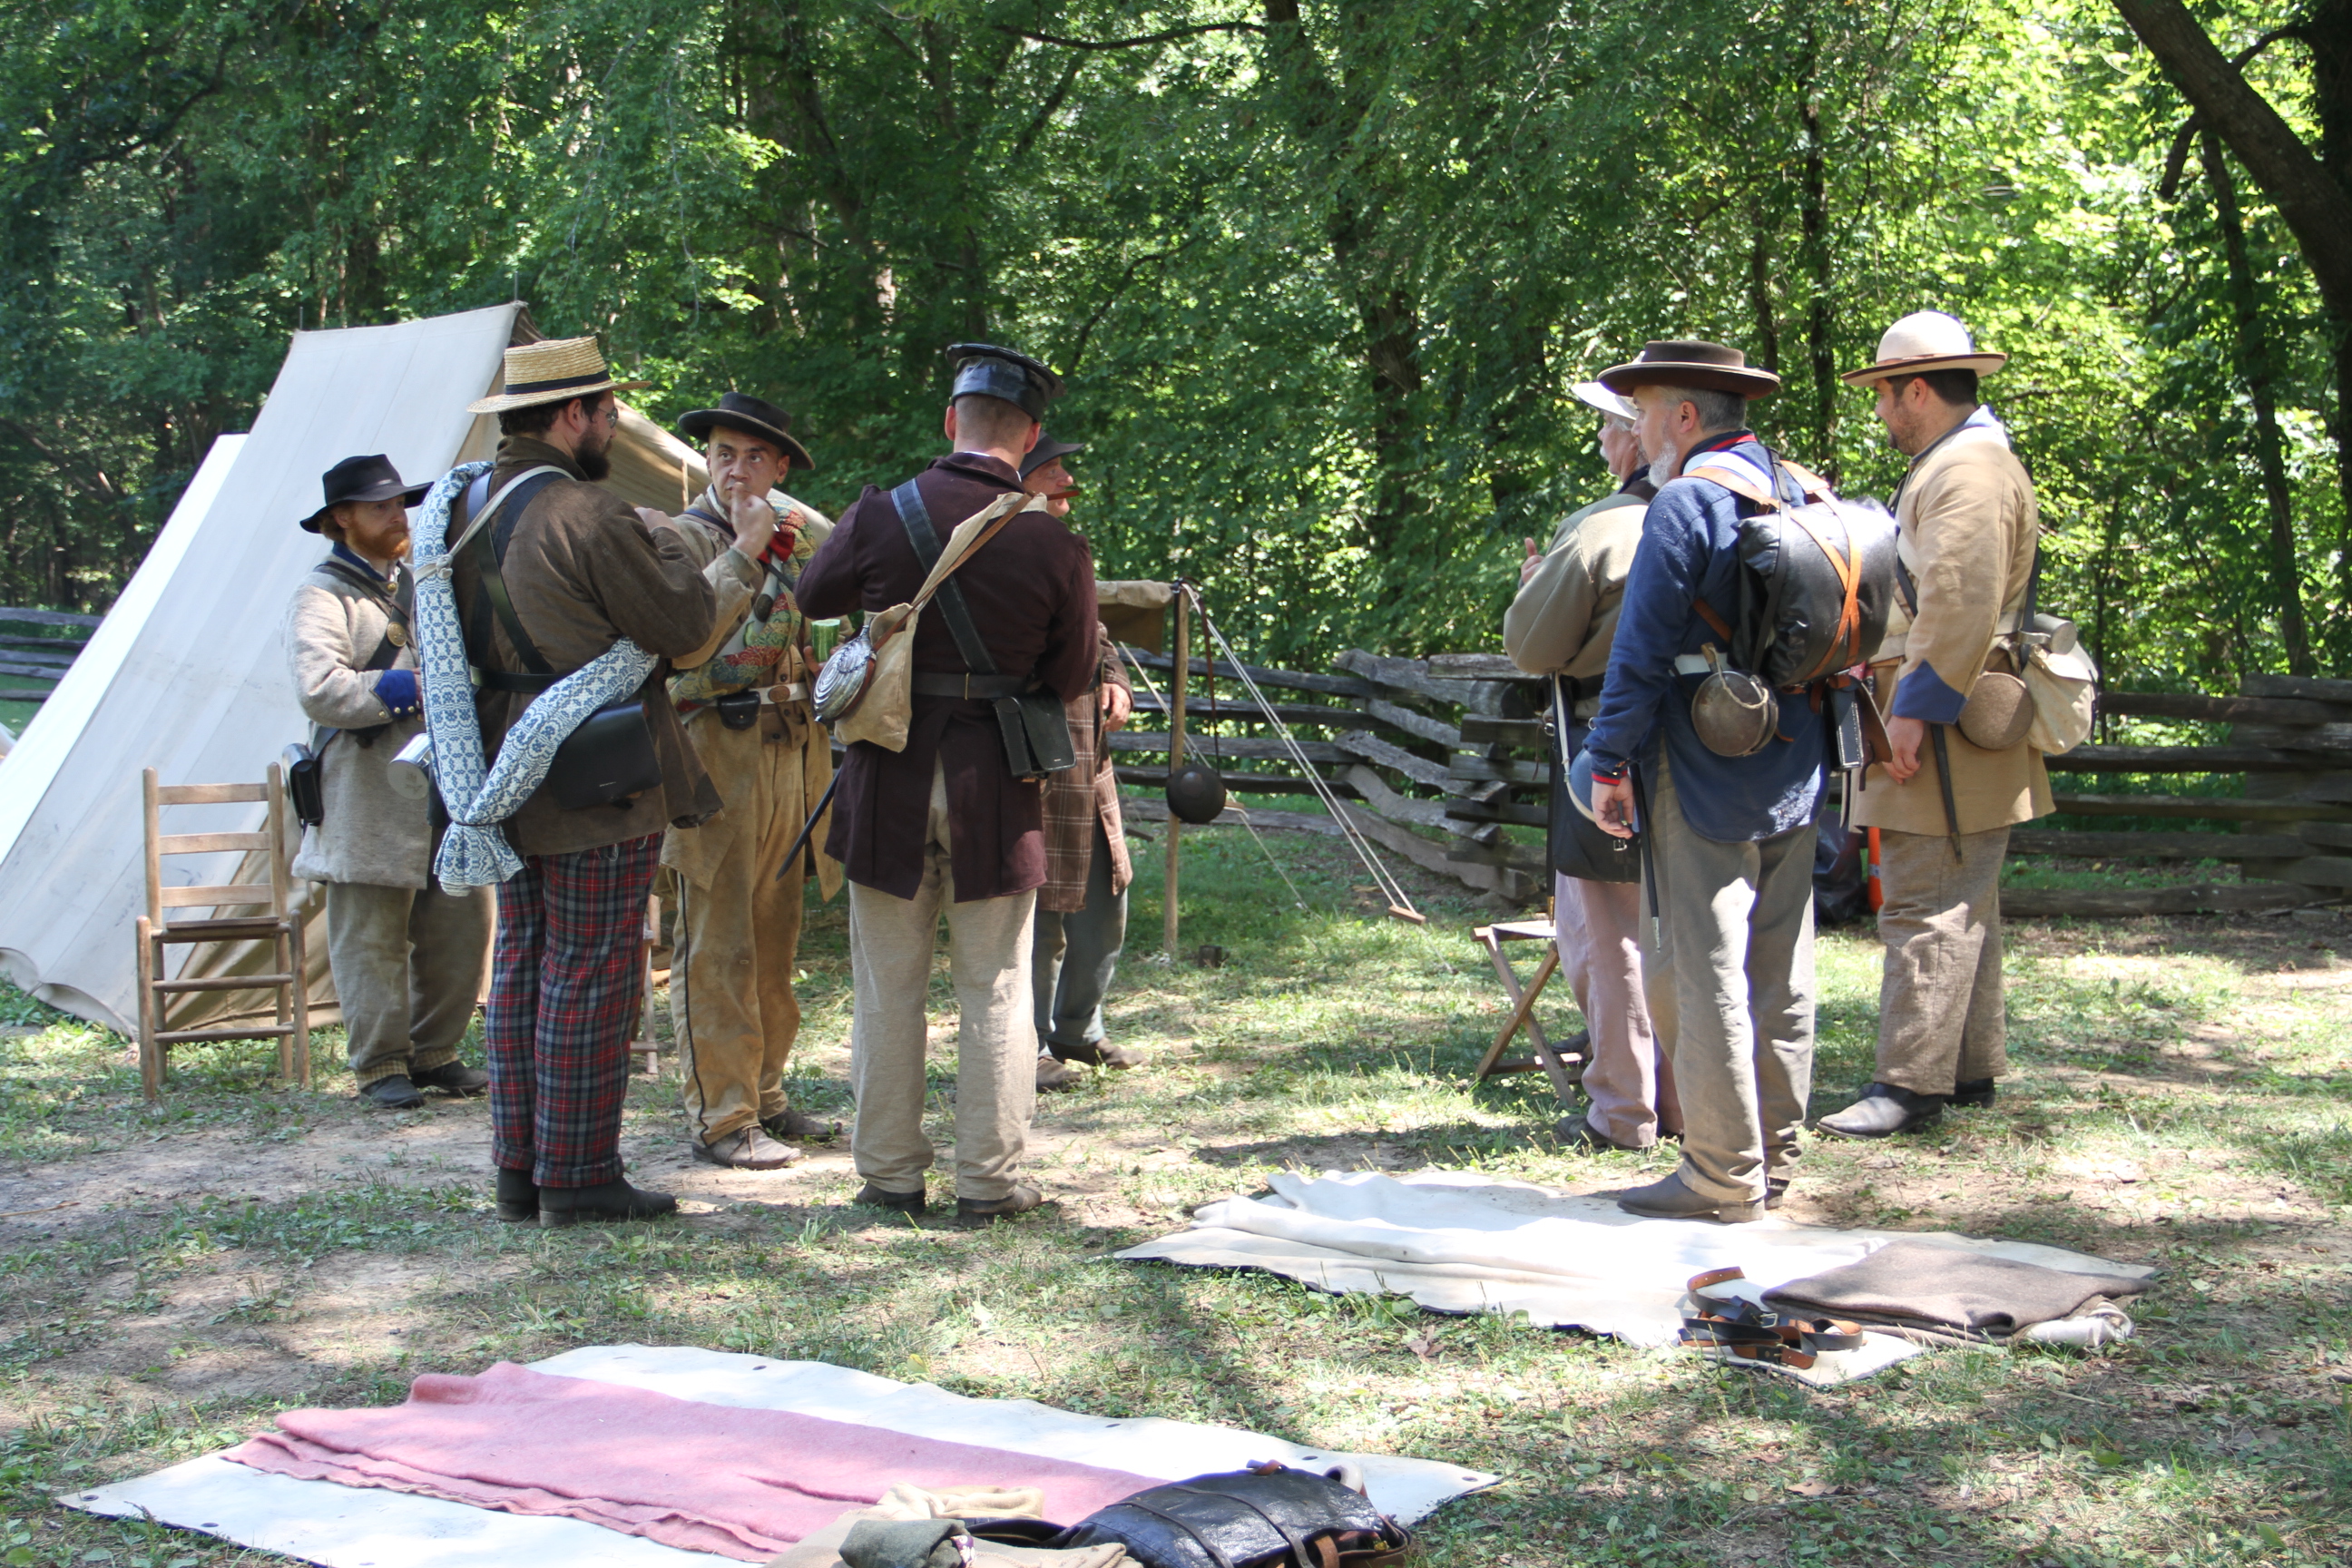 soldiers encamped at Ft Donelson